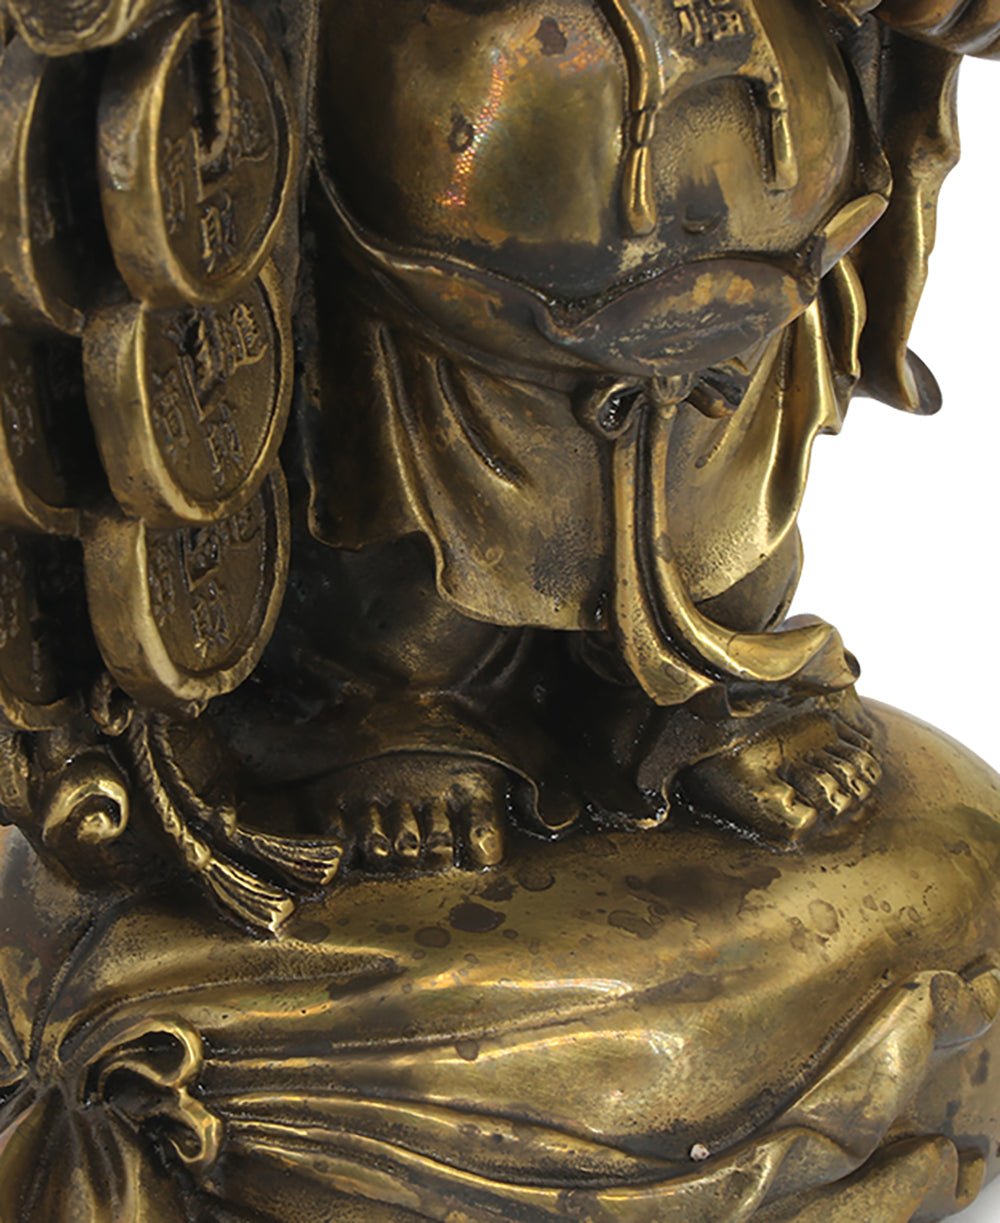 Traditional Bronze Casting Happy Buddha Wandering Monk Statue - Sculptures & Statues